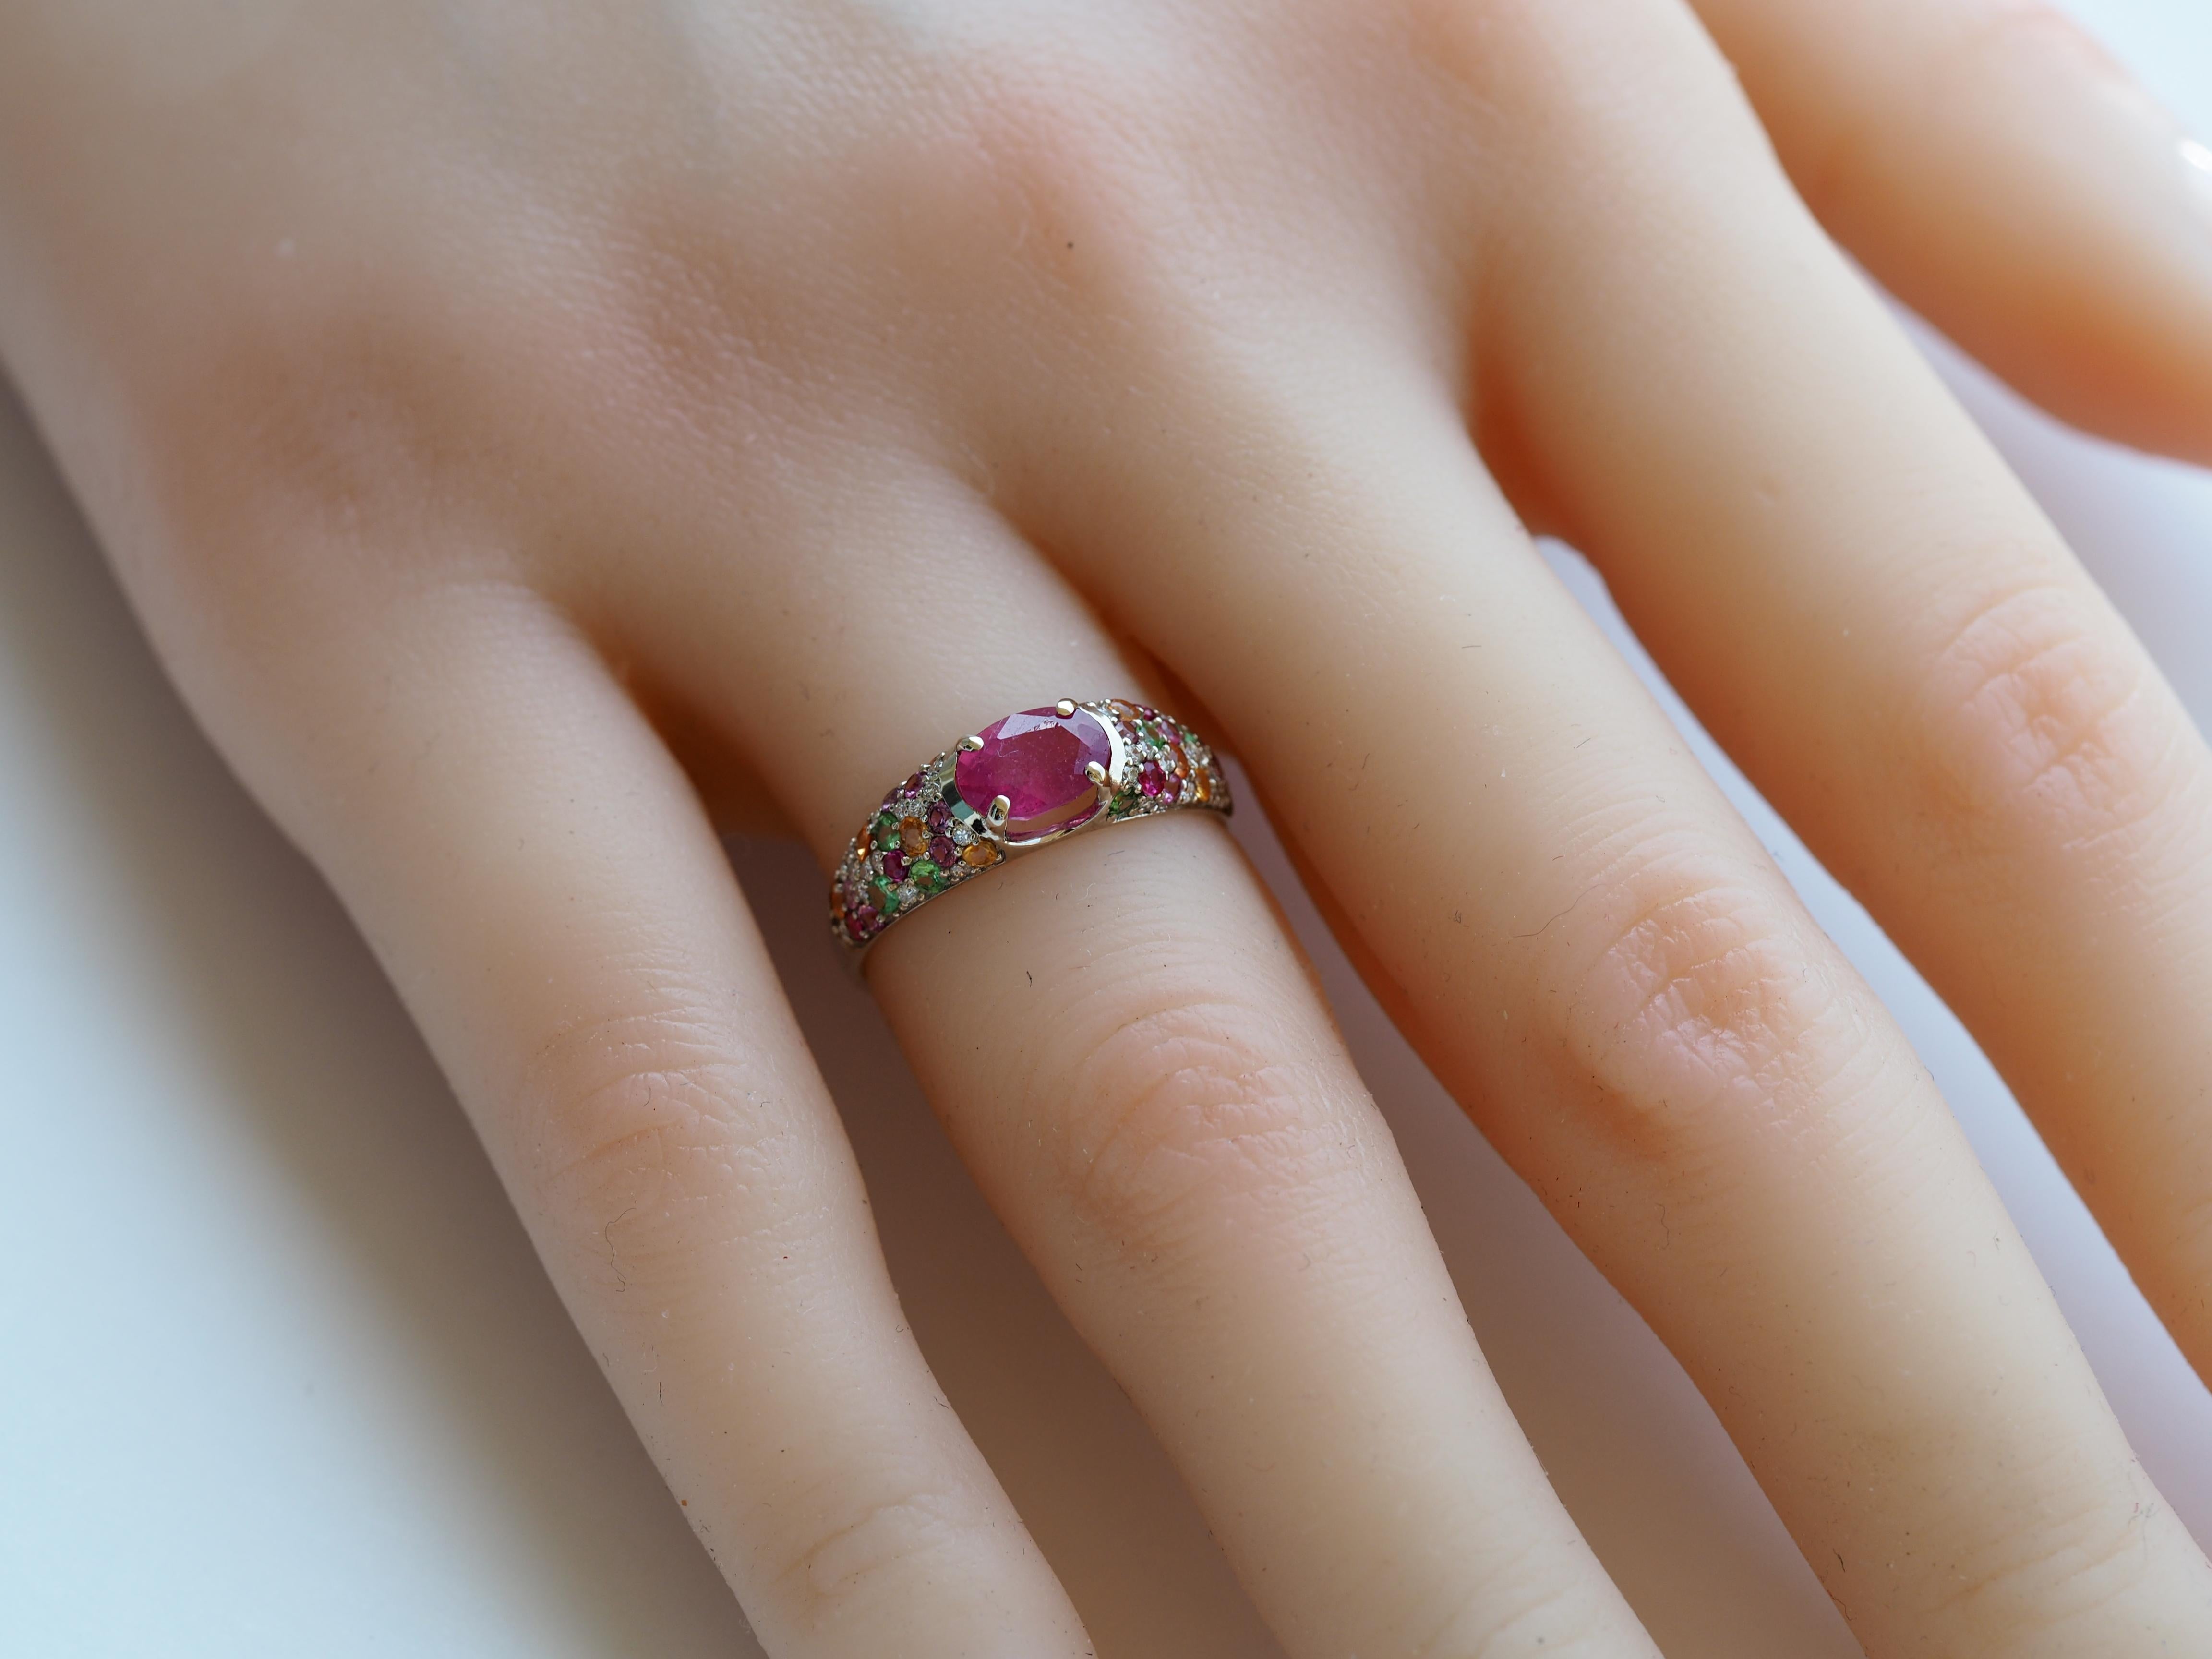 For Sale:  14k gold ruby and multicolored gemstones ring. 10